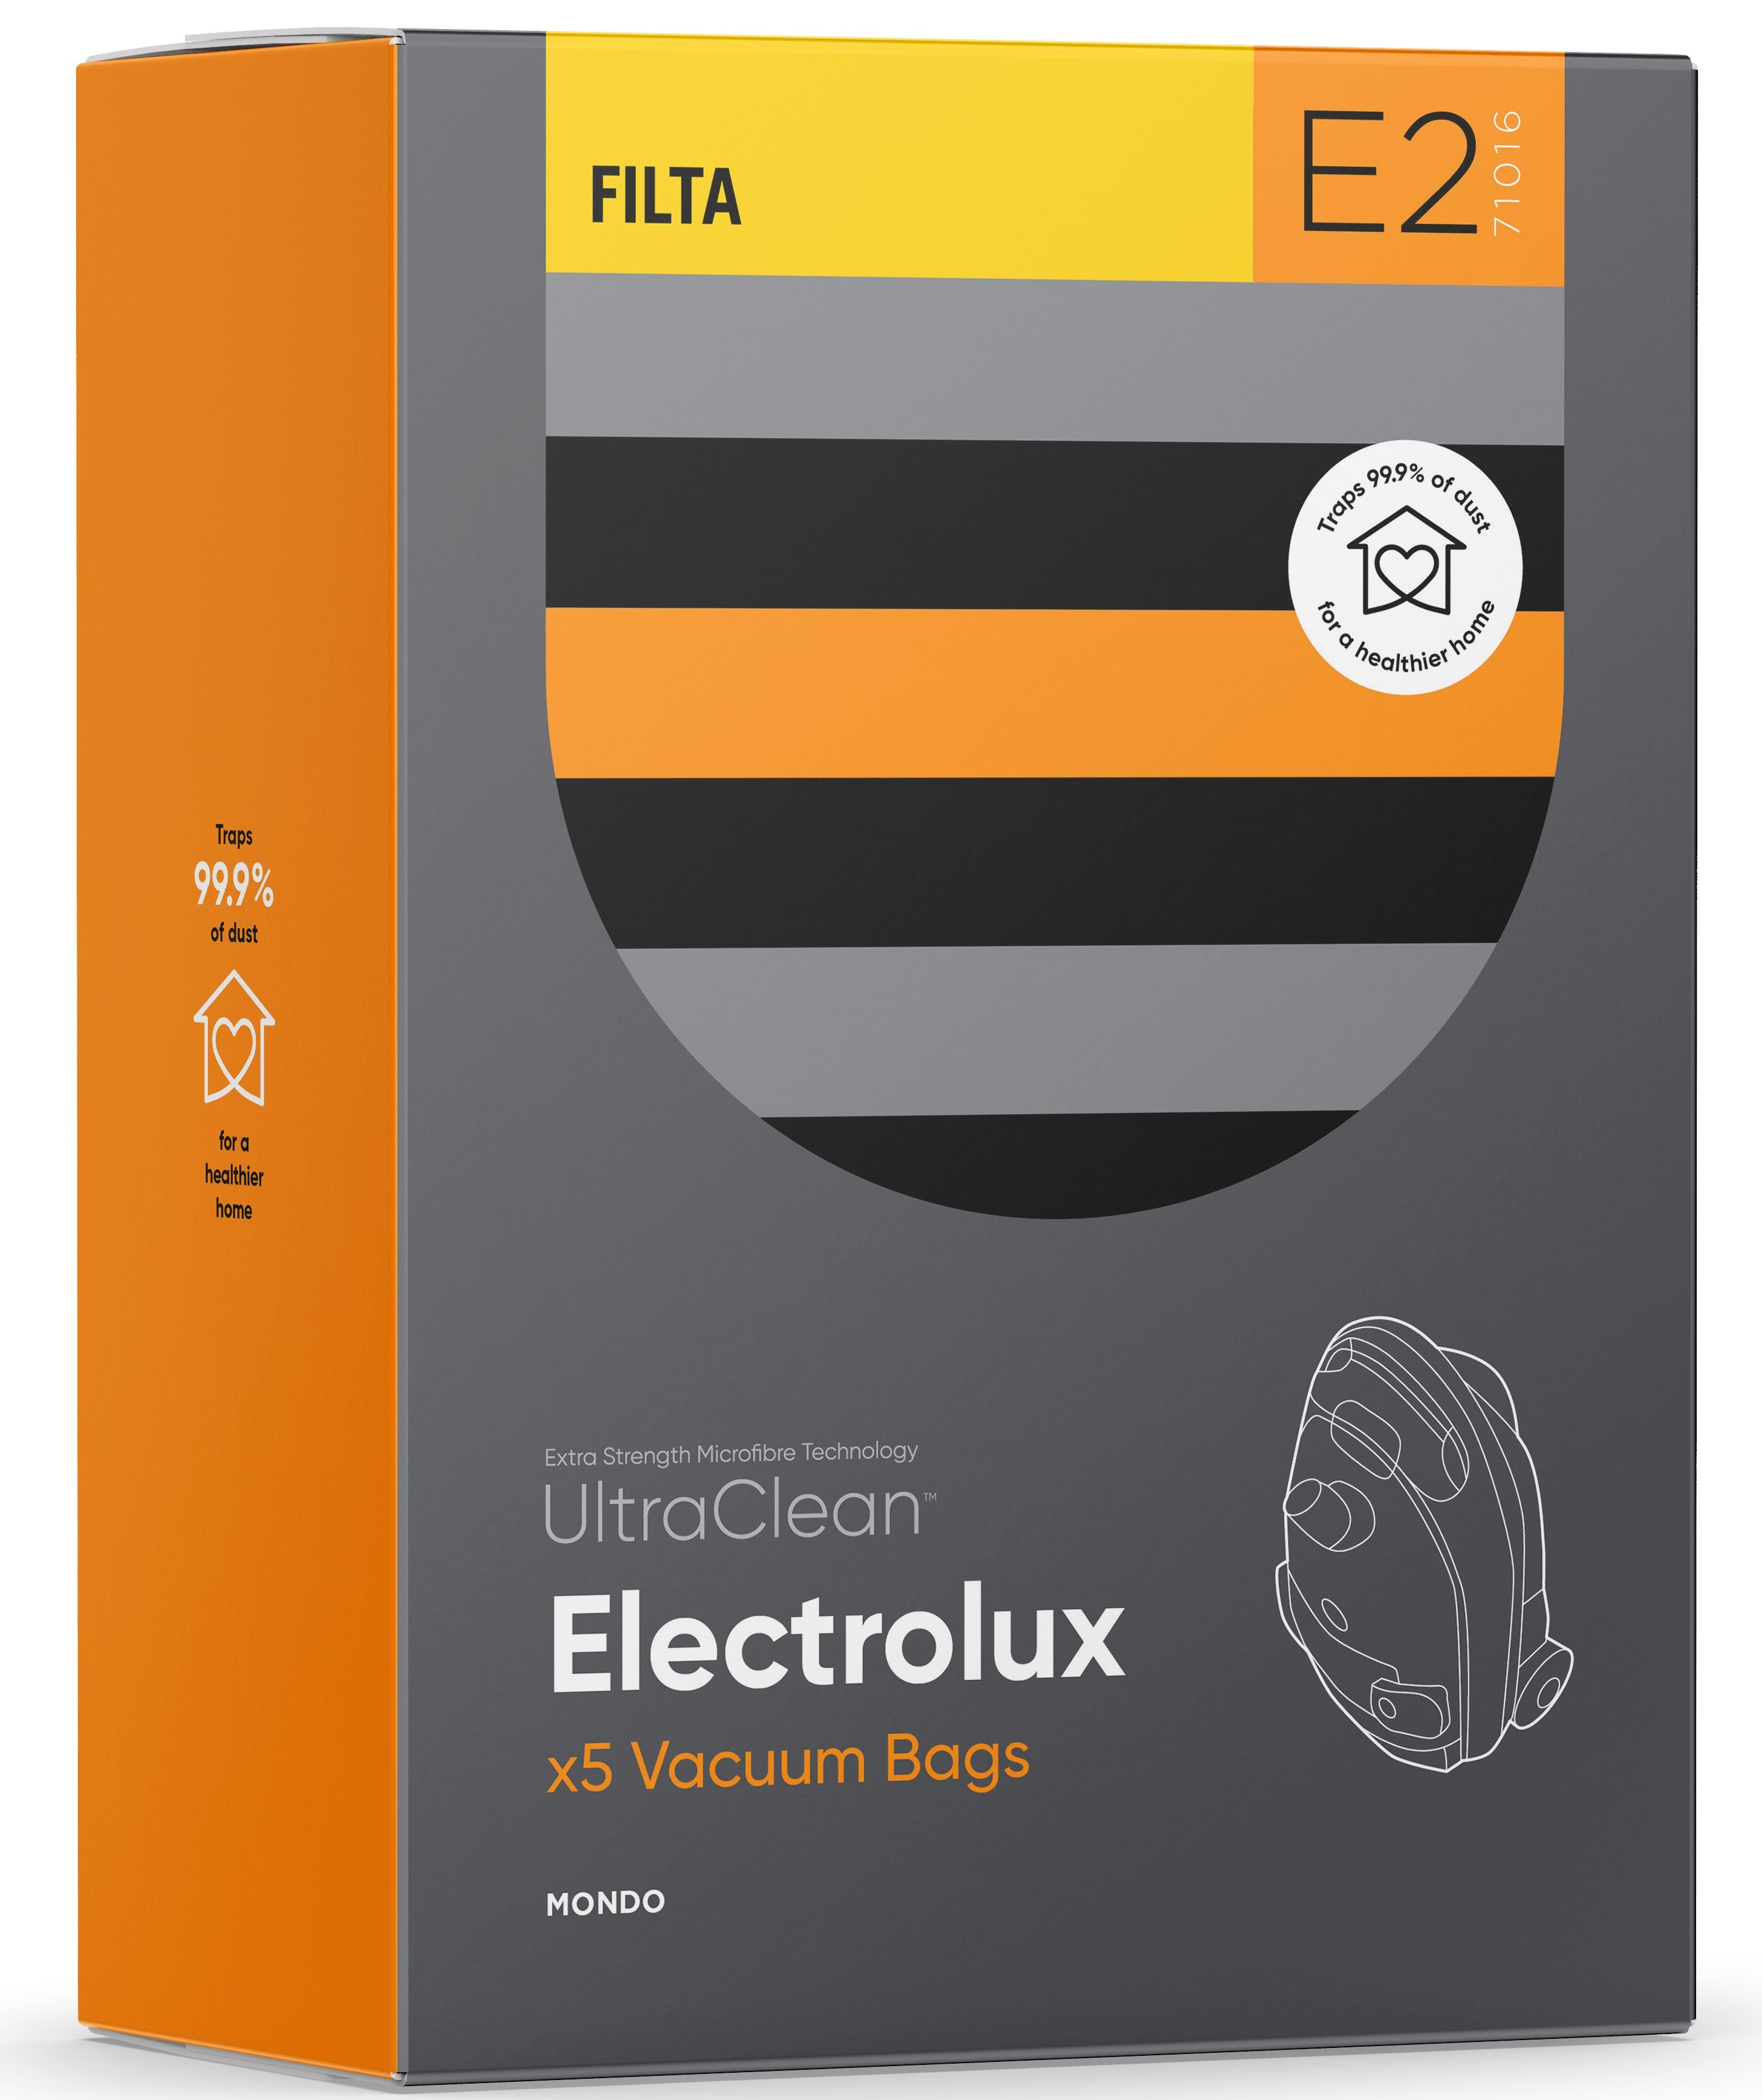 E2 - ULTRACLEAN ELECTROLUX MONDO SMS MULTI LAYERED VACUUM BAGS 5 PACK